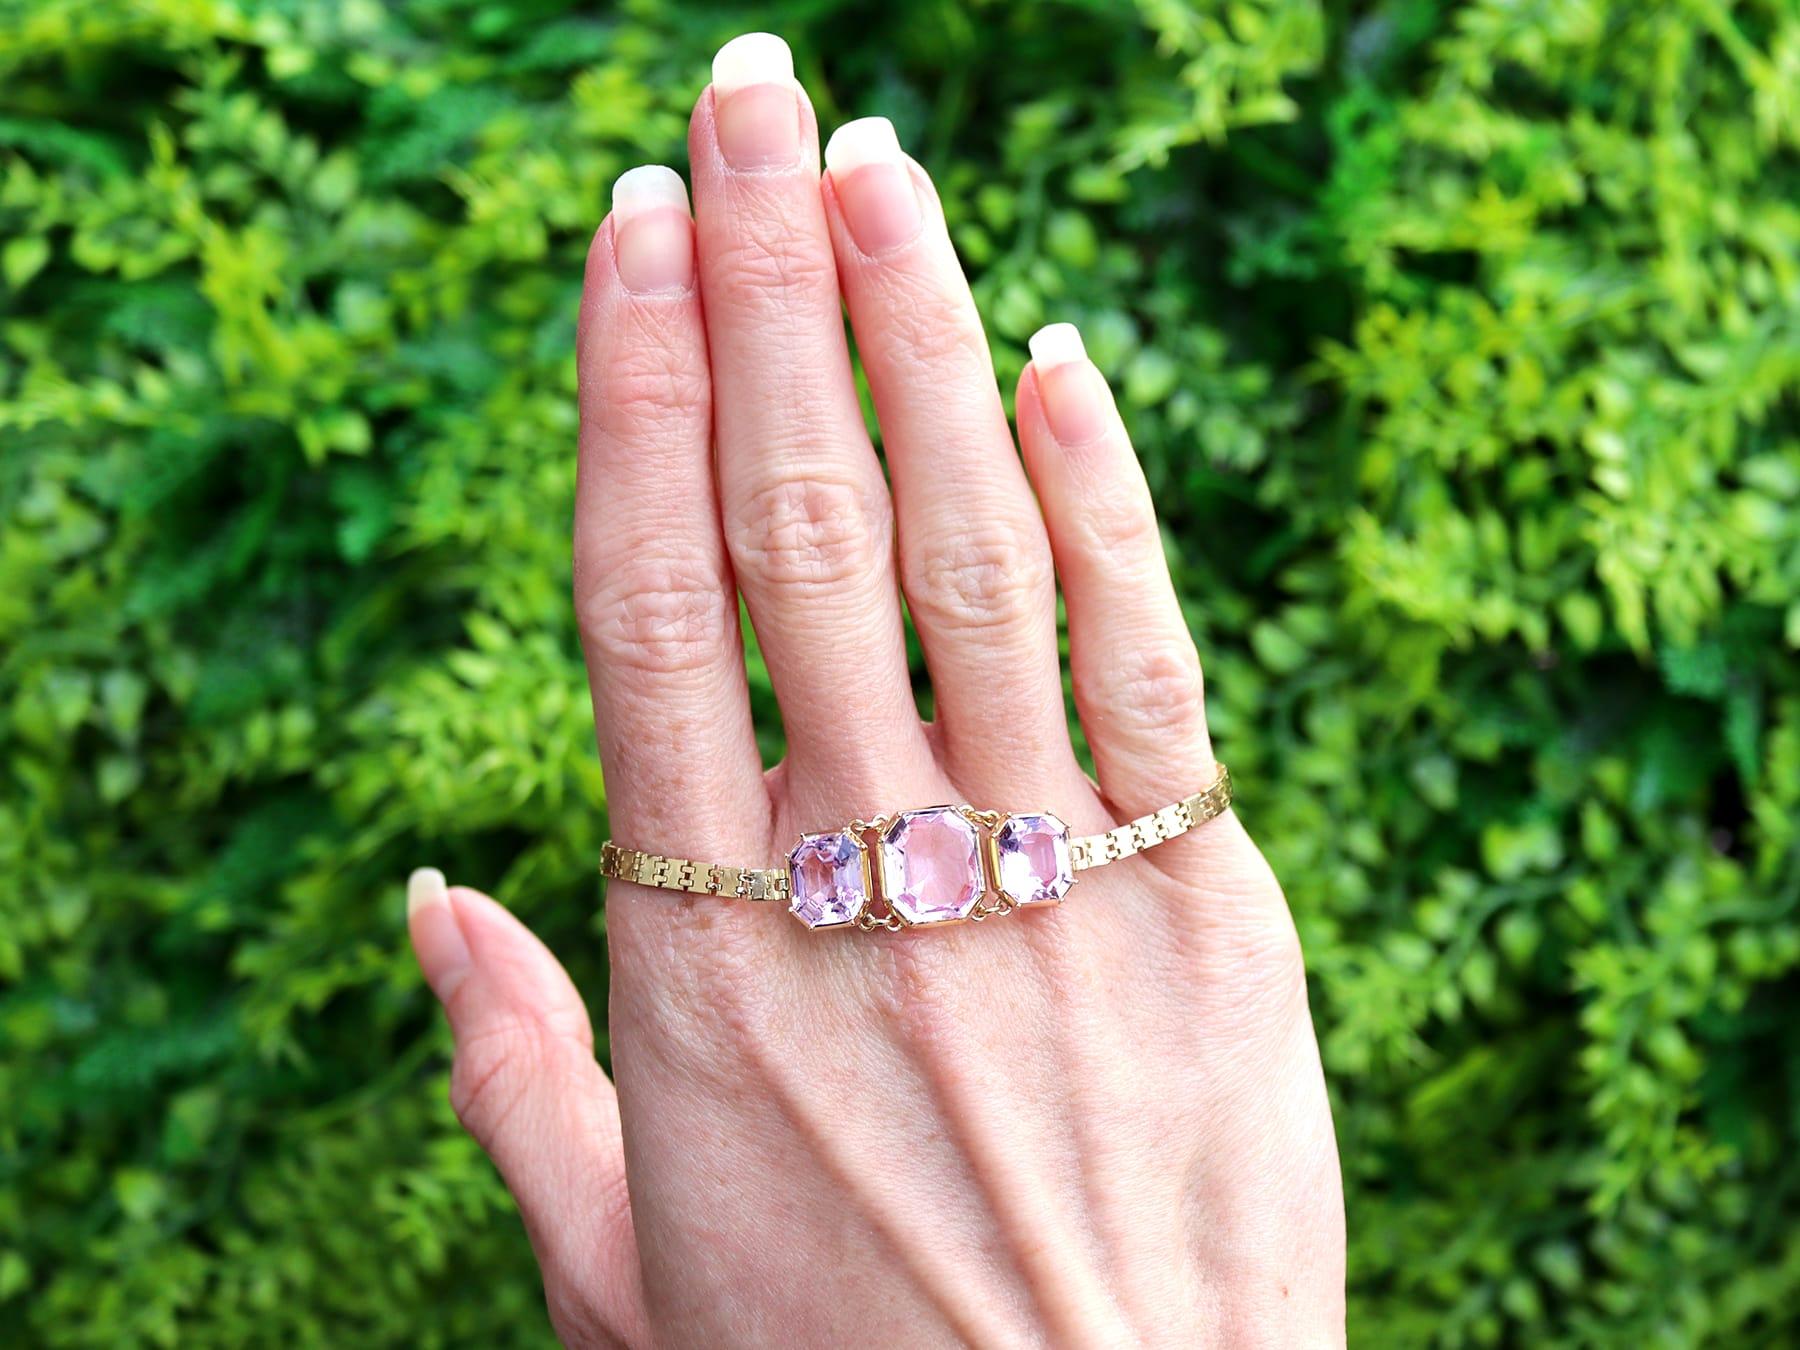 A stunning, fine and impressive antique Victorian 13.20 carat pink topaz and 18 karat yellow gold and 15 karat yellow gold set bracelet; part of our bangle and bracelet collection.

This stunning fine and impressive antique bracelet has been crafted